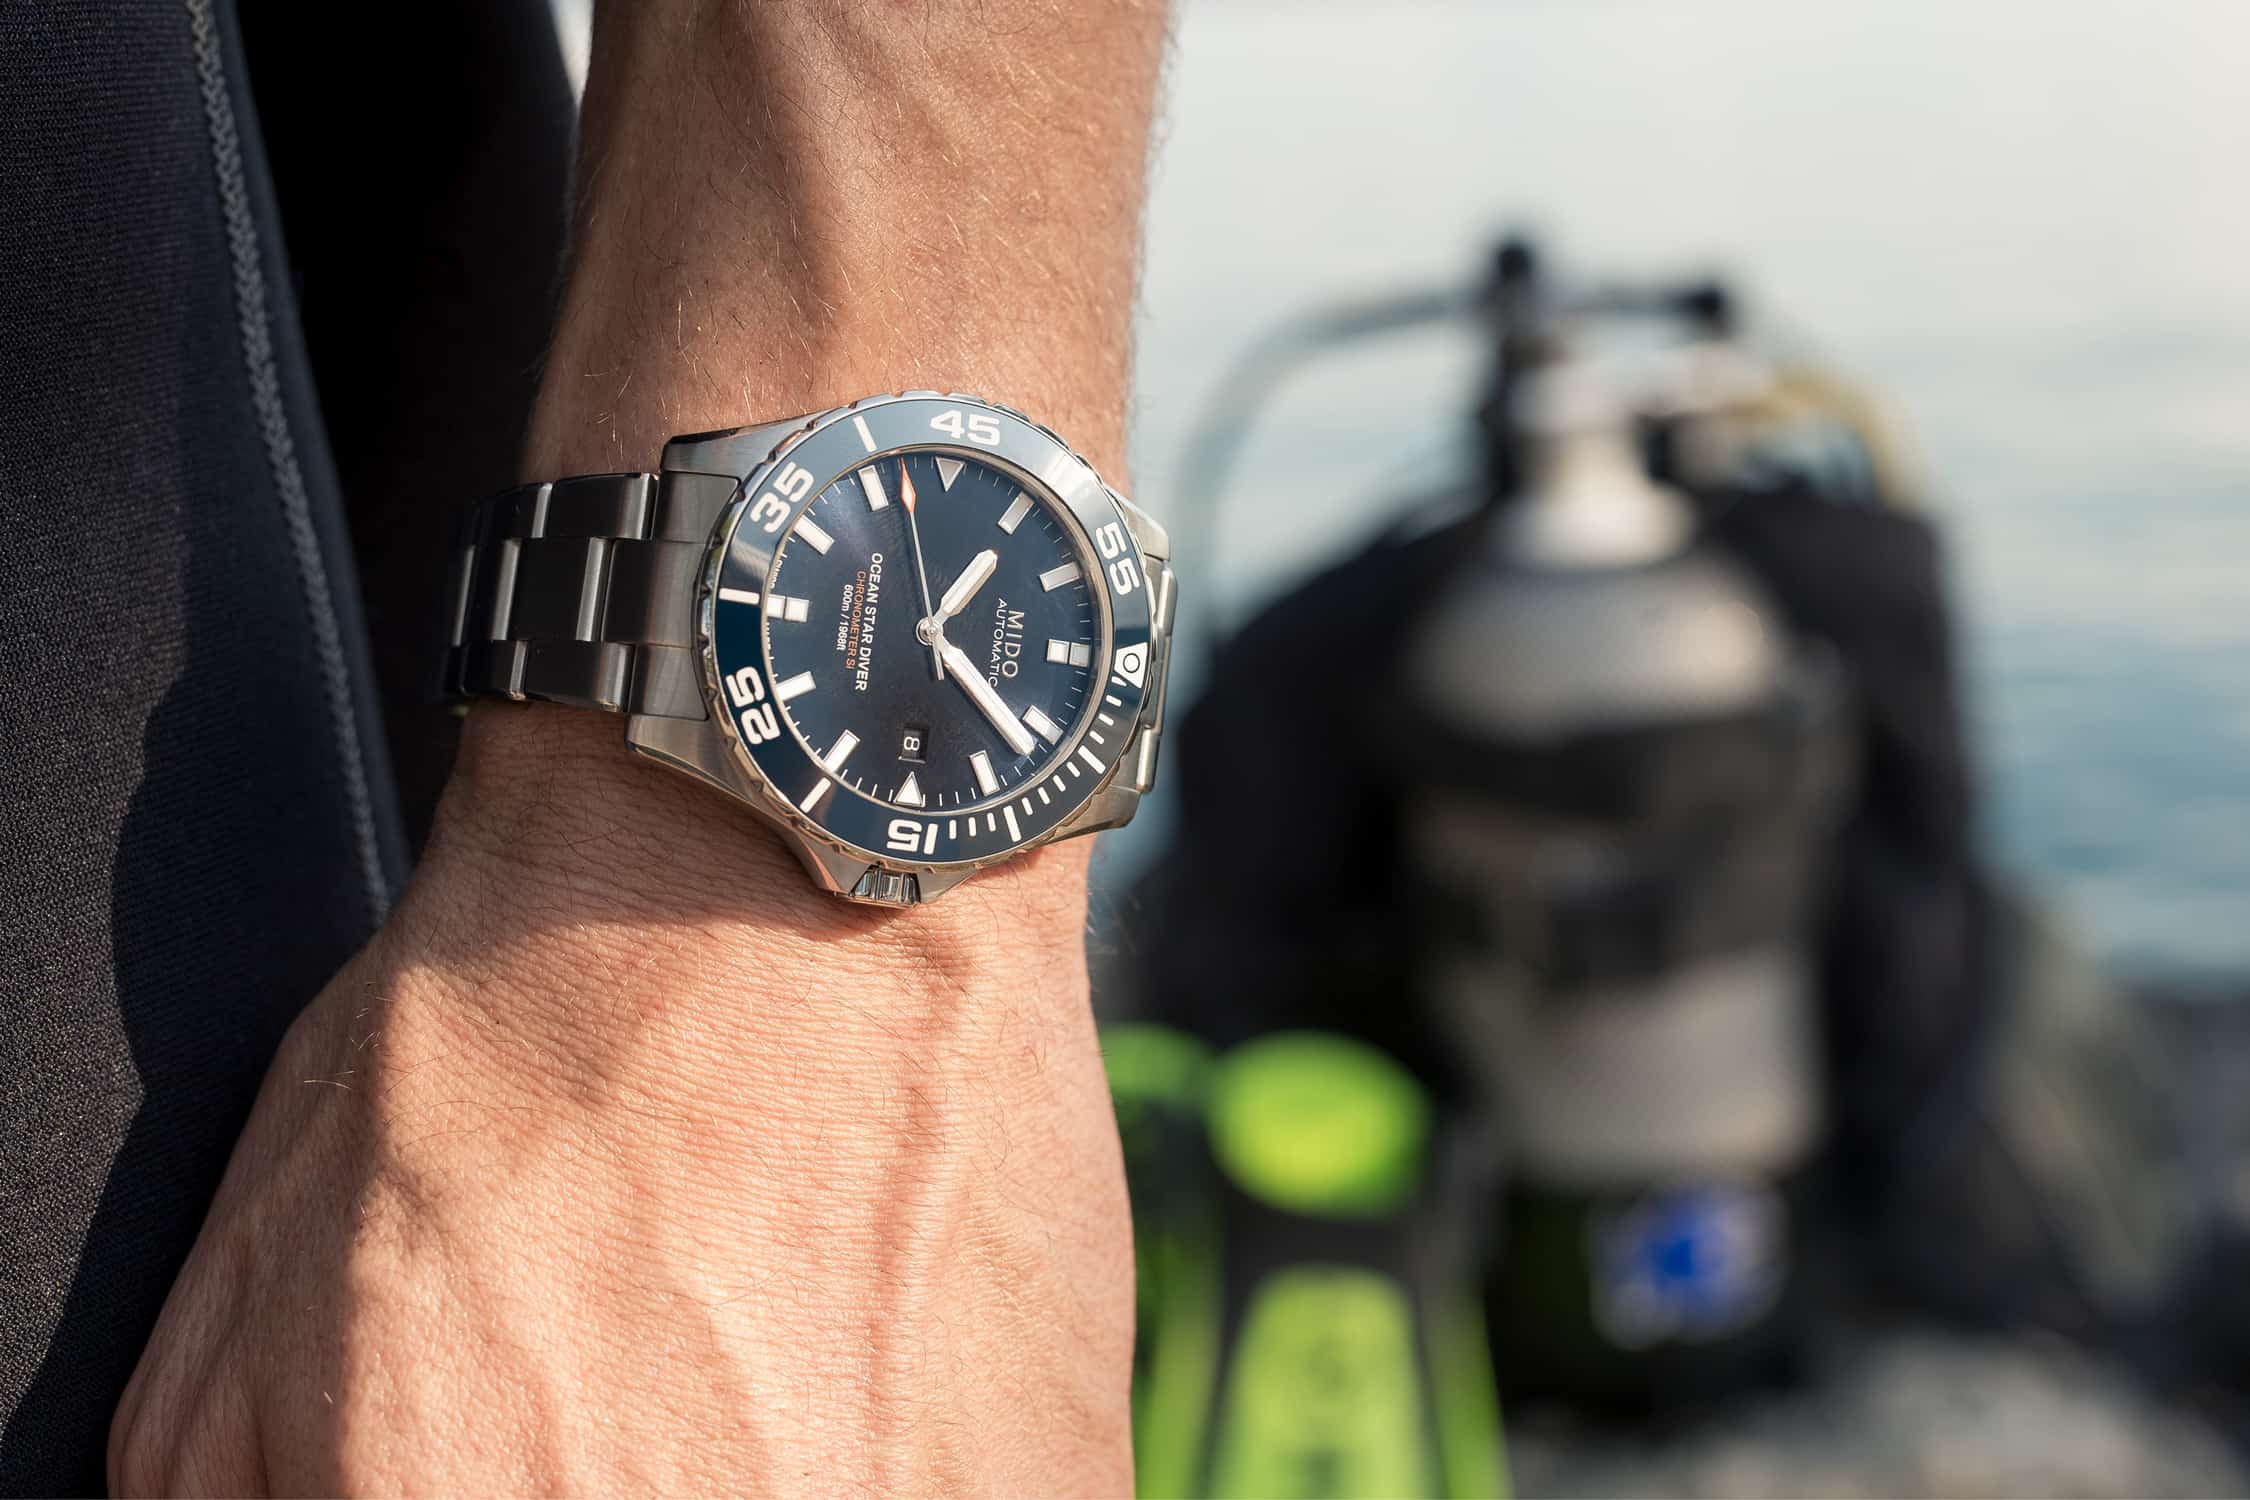 Introducing the Mido Ocean Star Diver 600